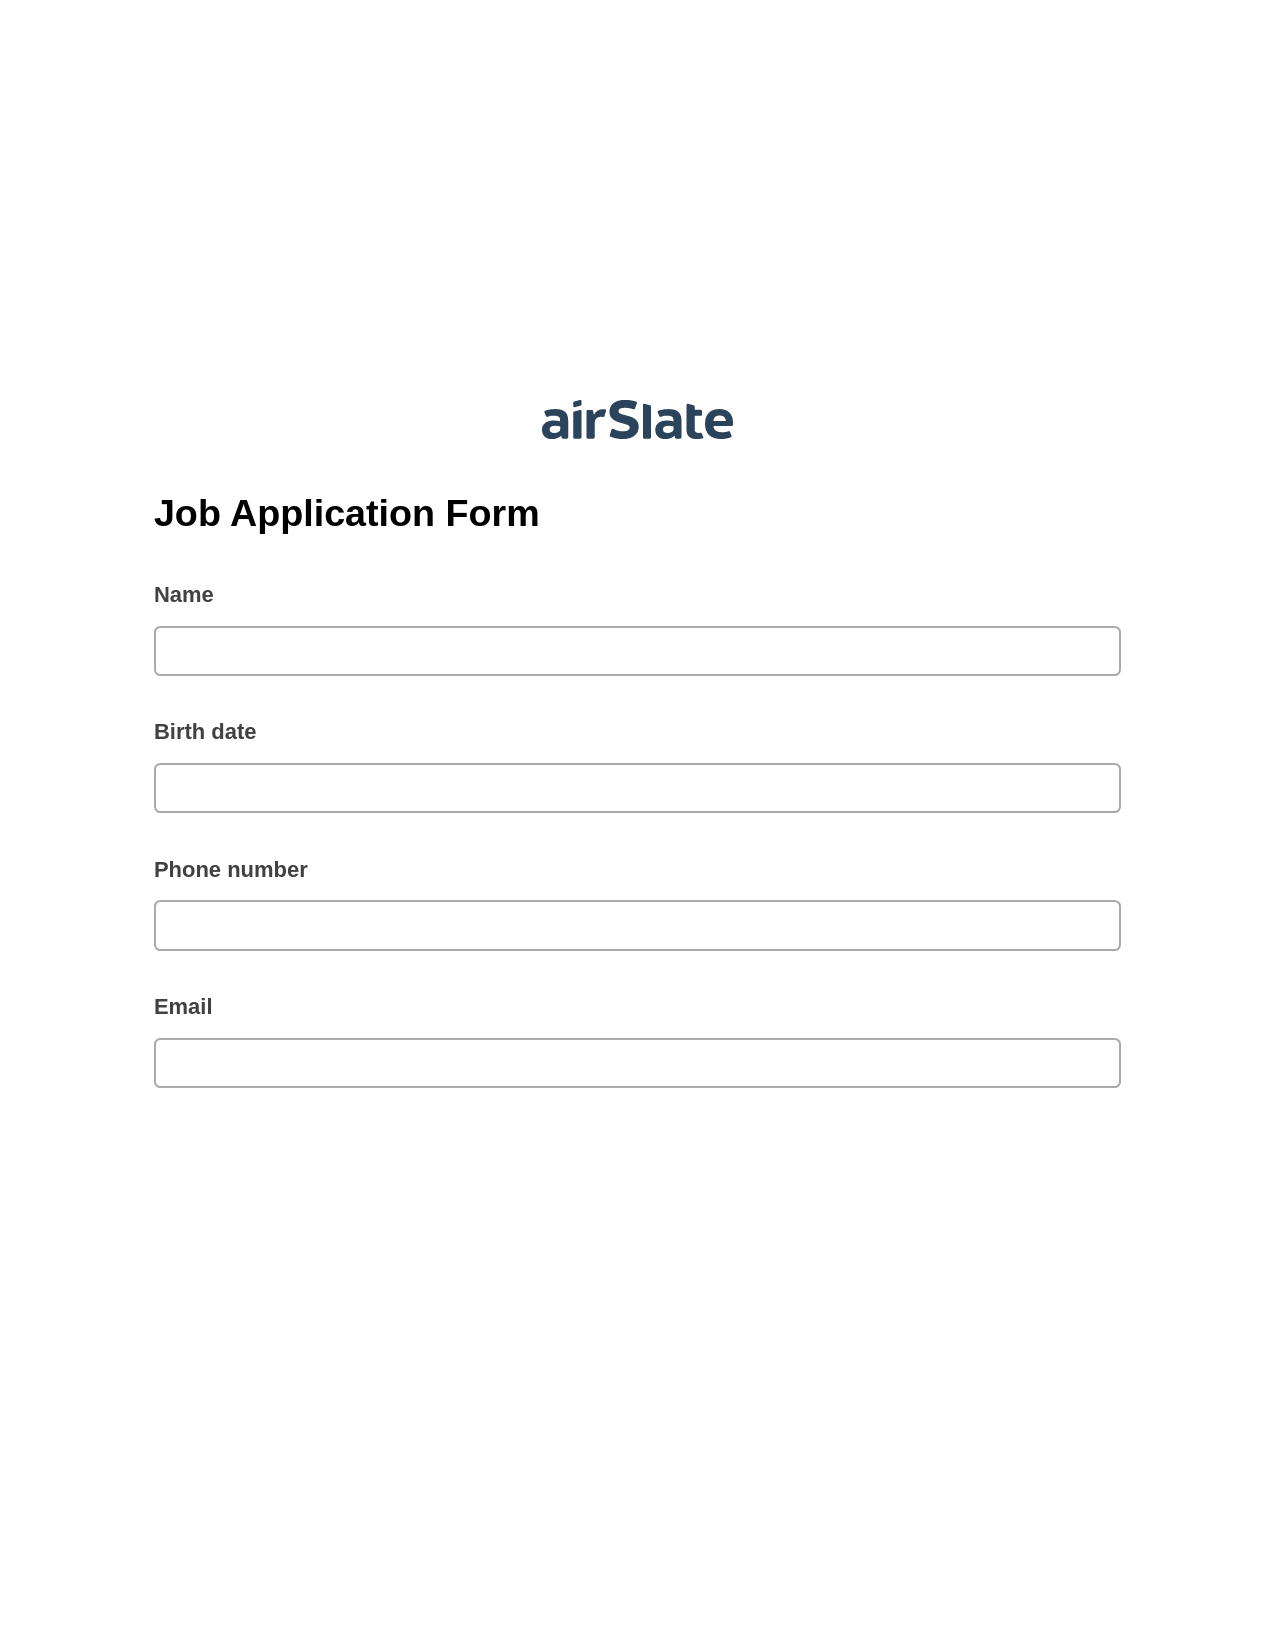 Job Application Form Pre-fill from Office 365 Excel Bot, Mailchimp send Campaign bot, Export to MySQL Bot